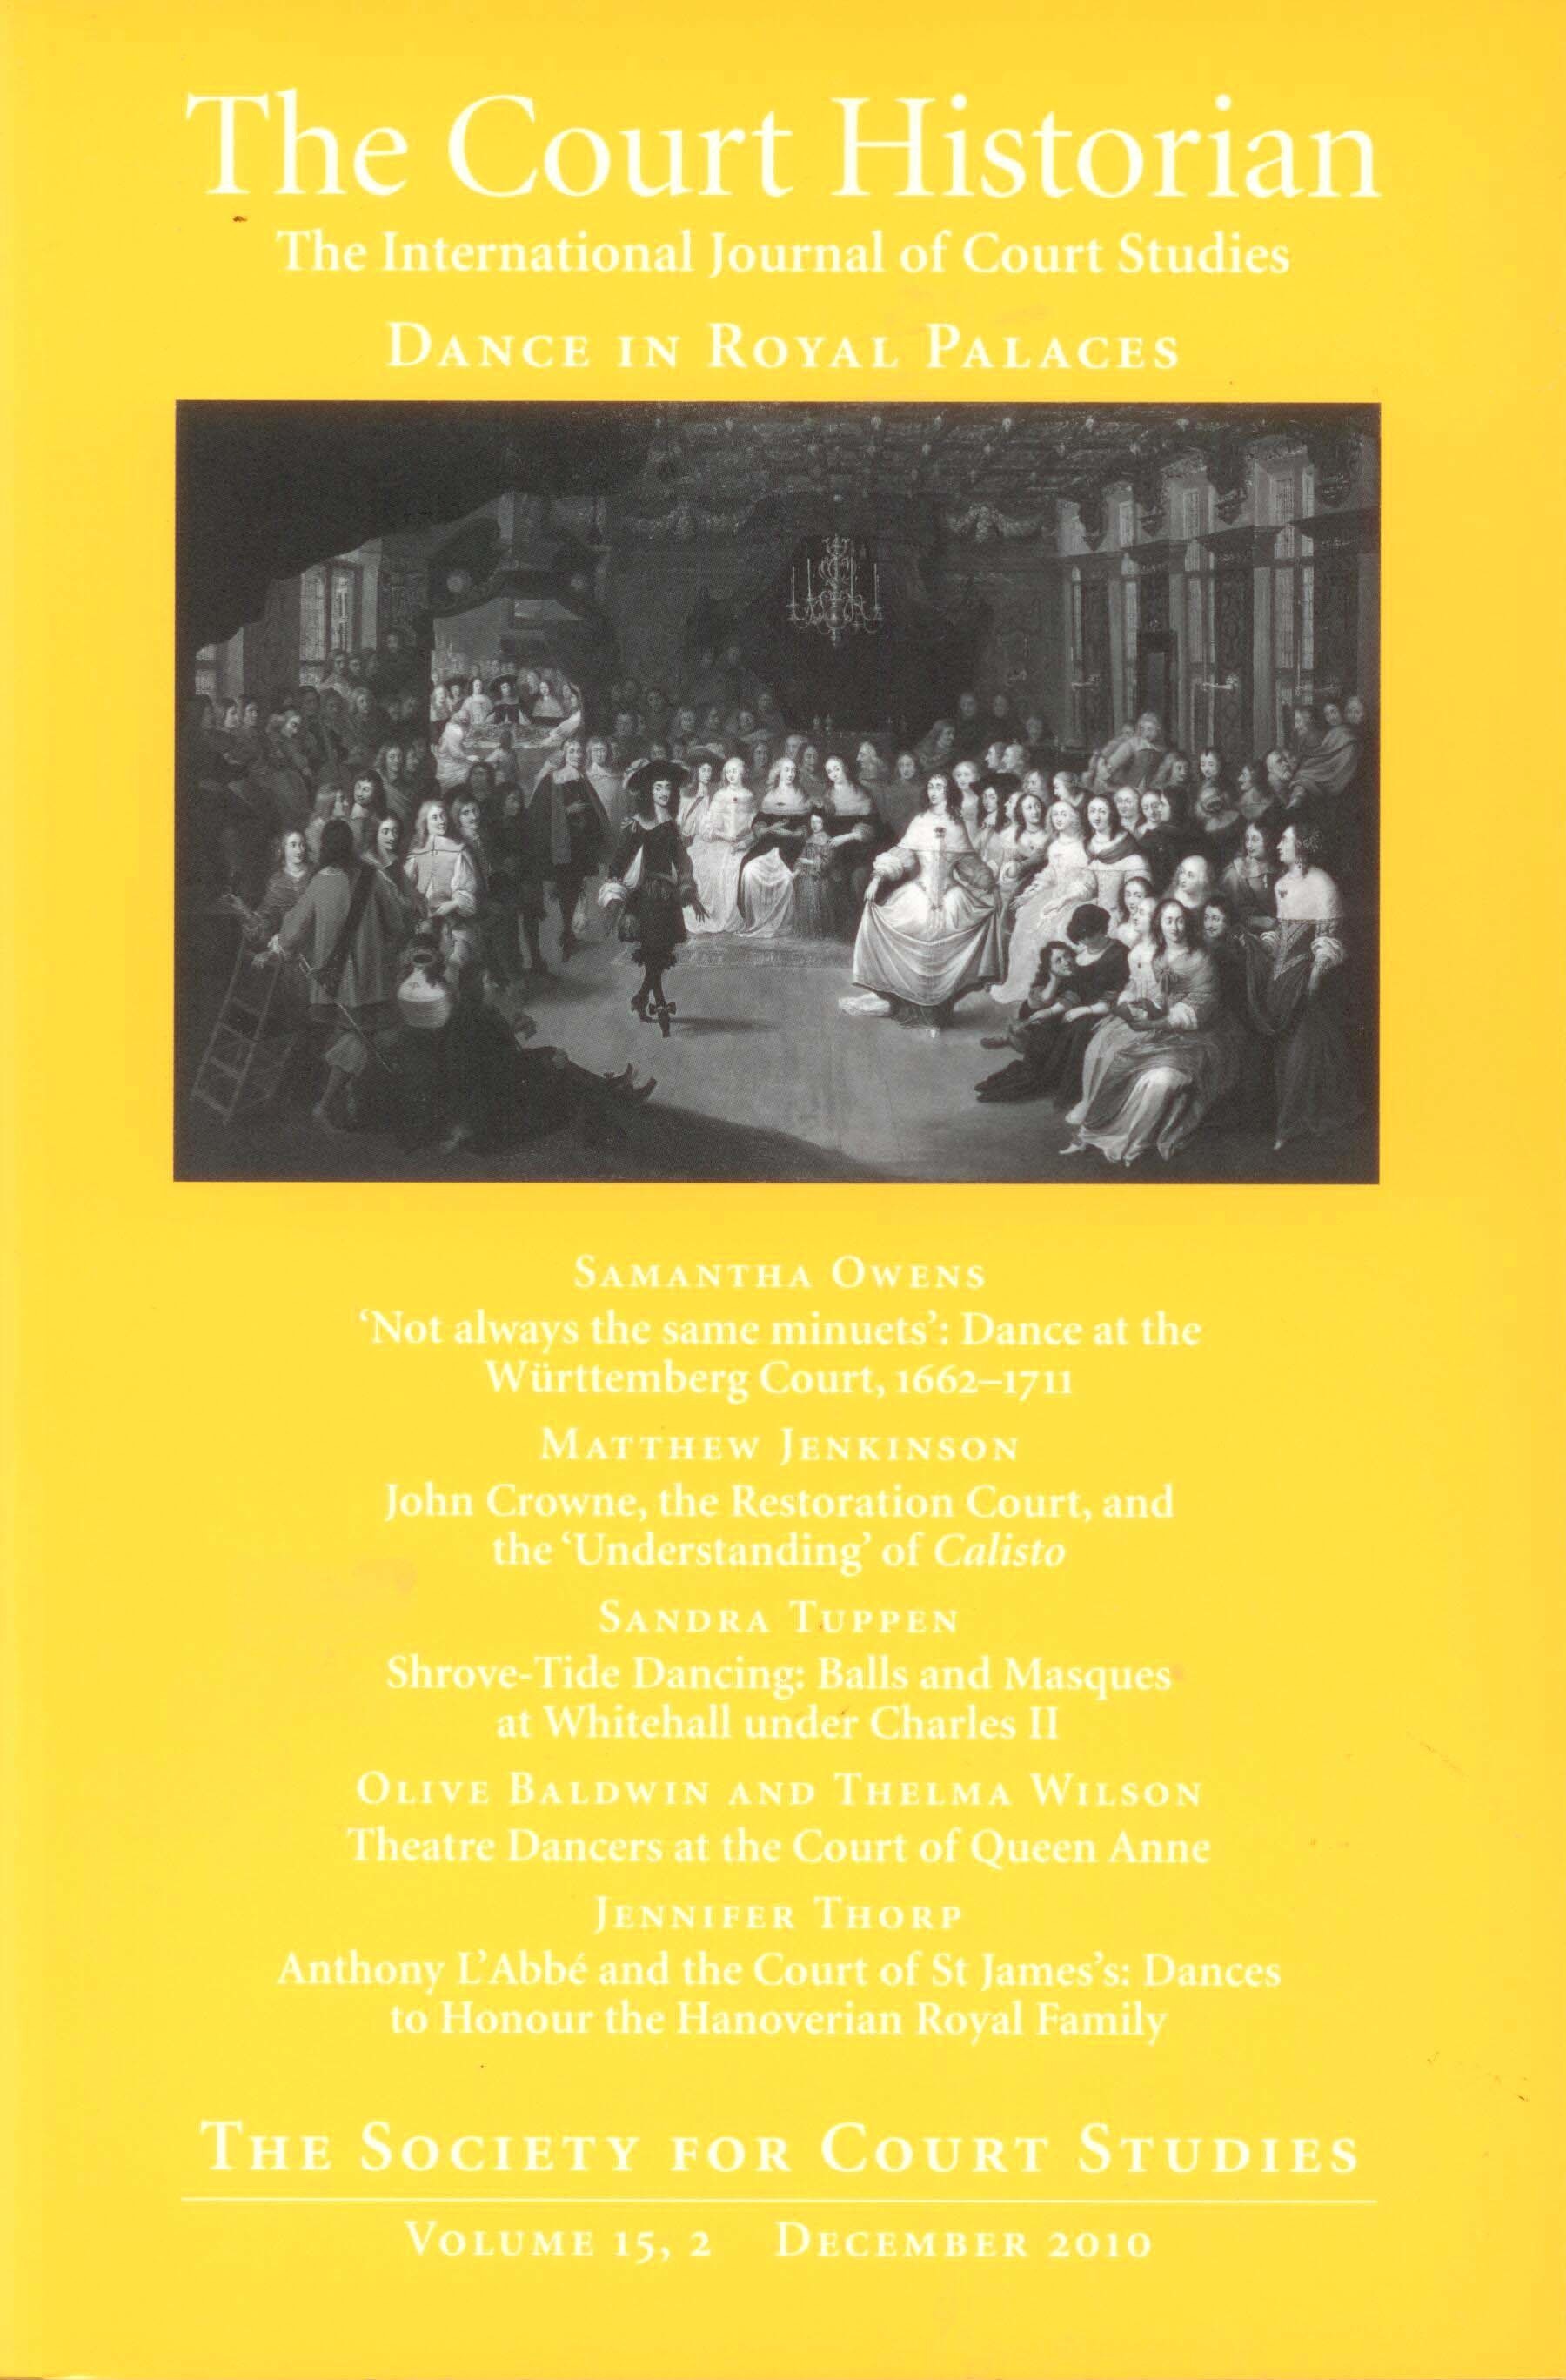 Dance in Royal Palaces book cover